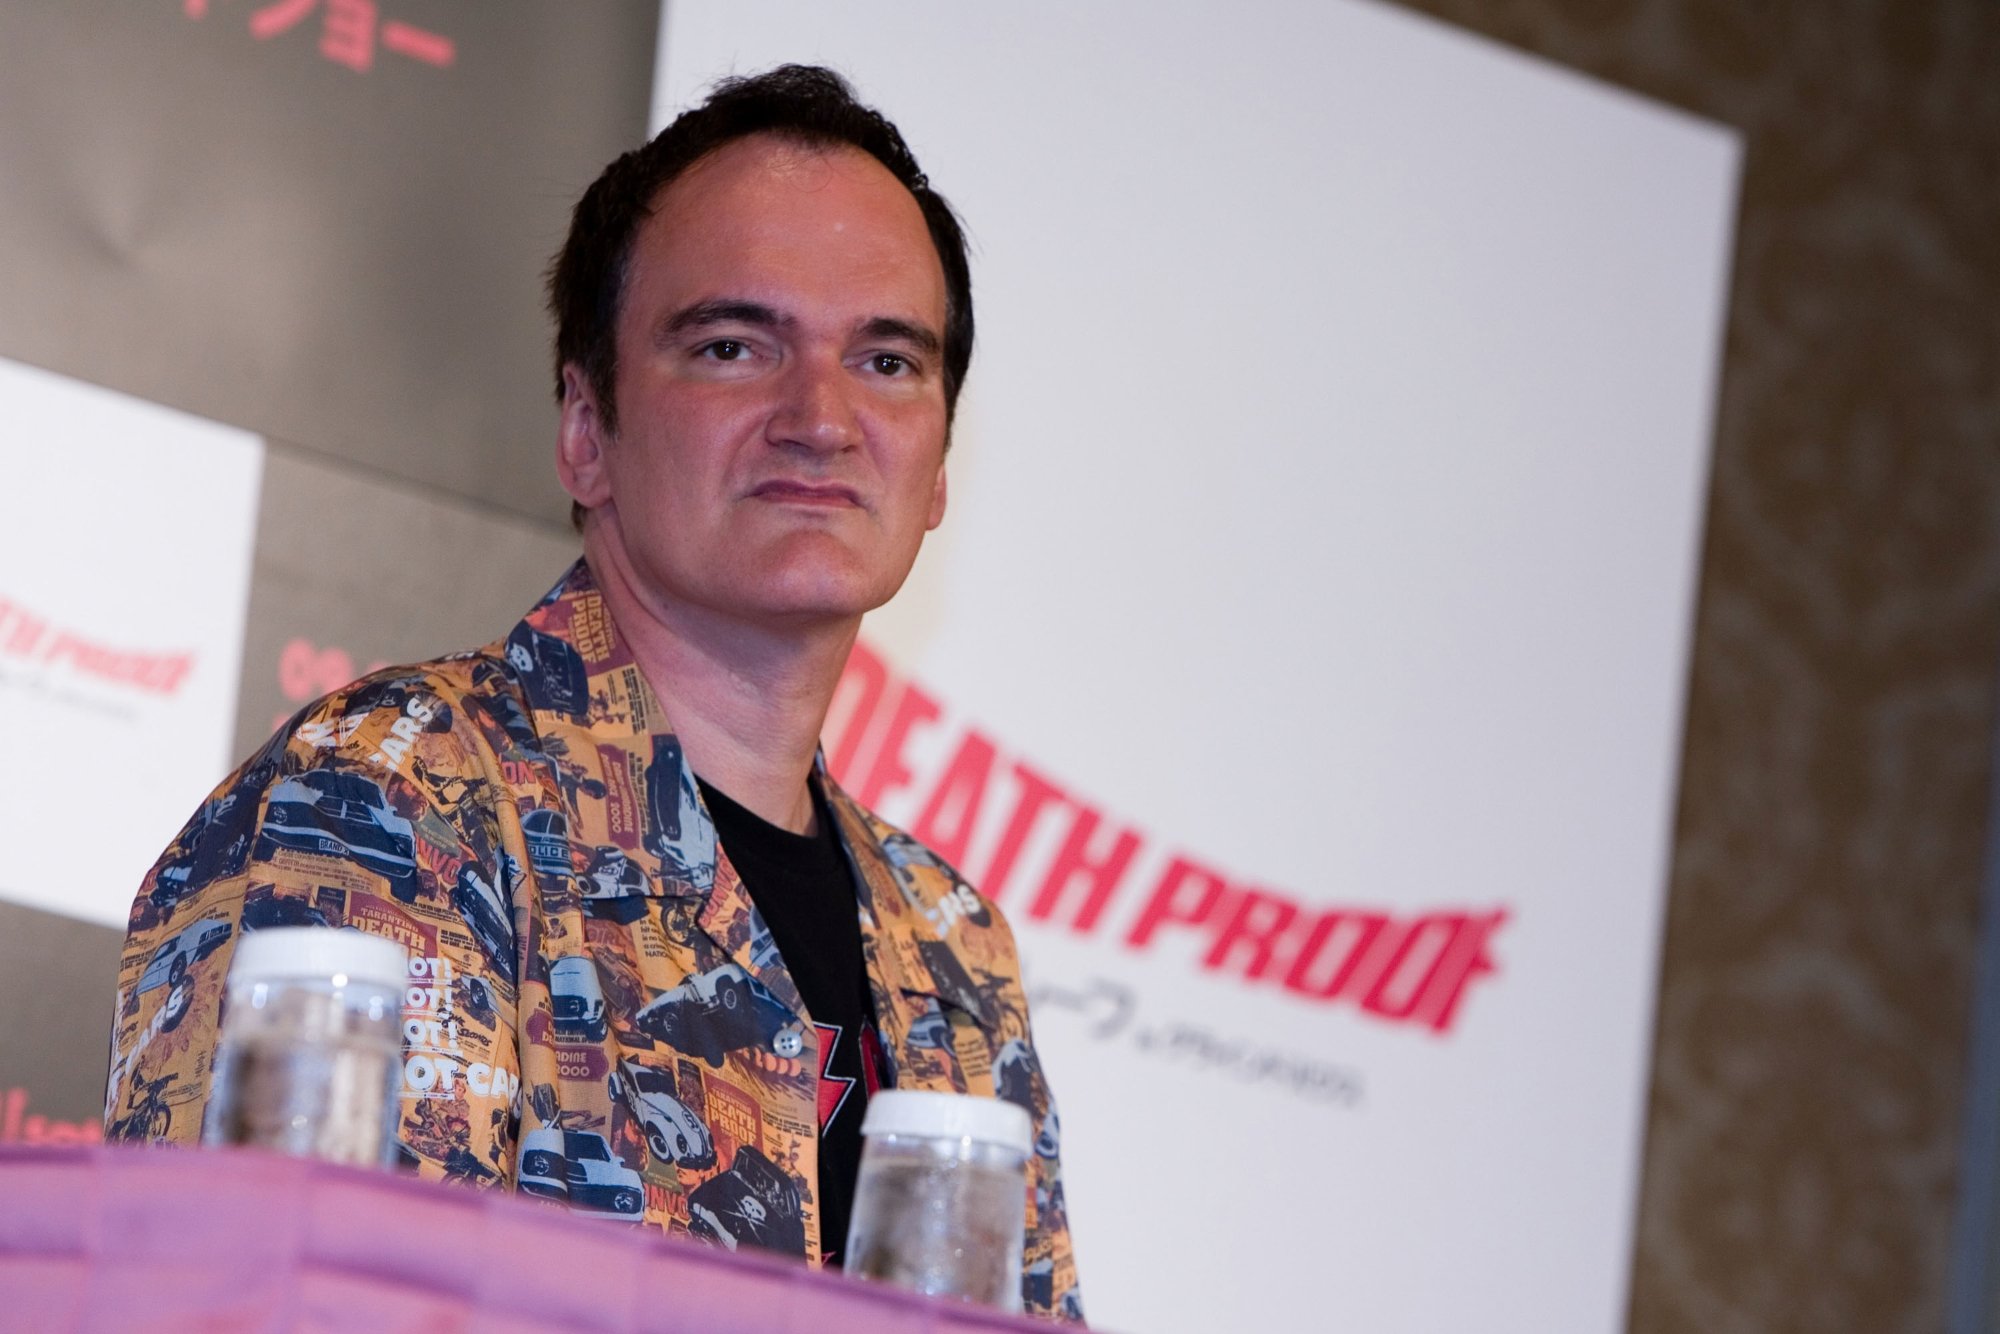 Quentin Tarantino, who fans say has a foot fetish, wearing a button-up shirt on a panel